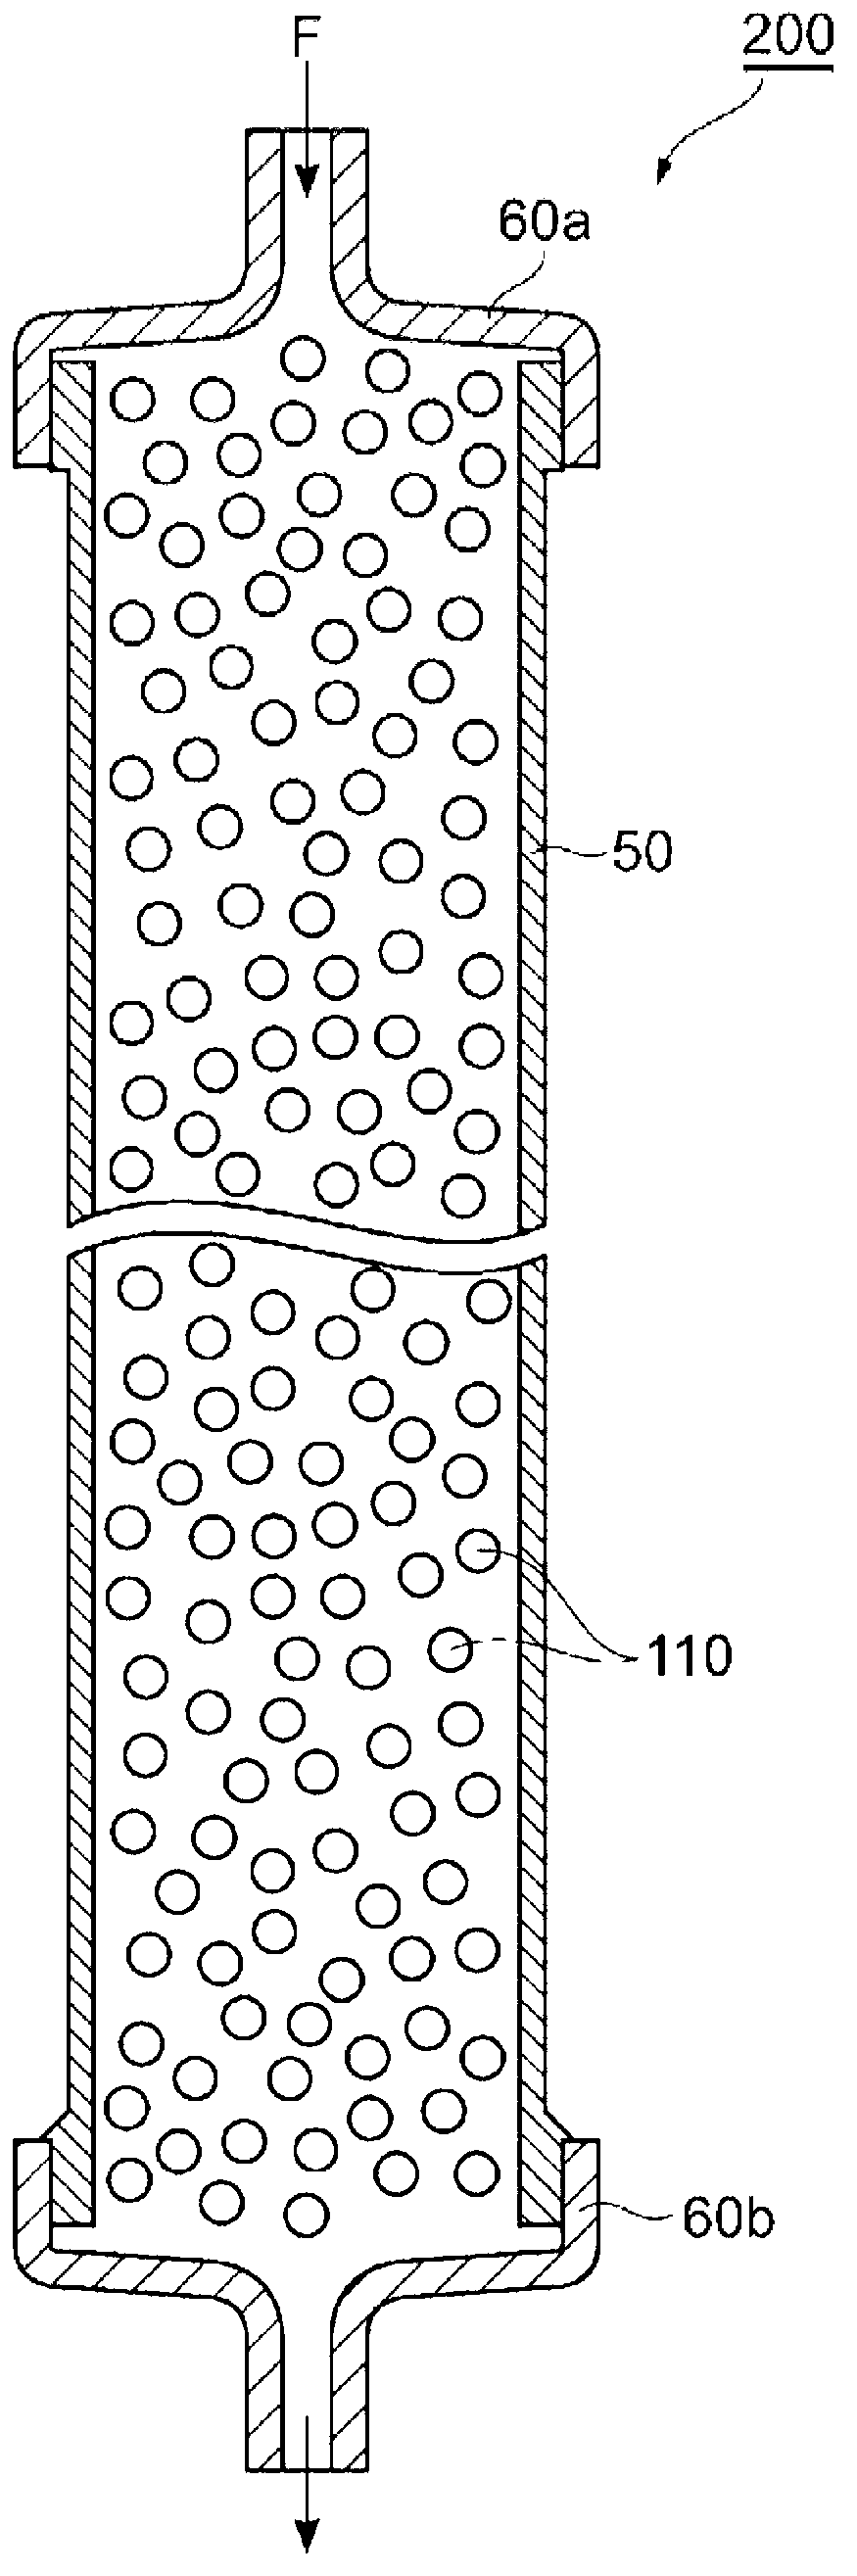 Substrate for ligand immobilization and method for producing same